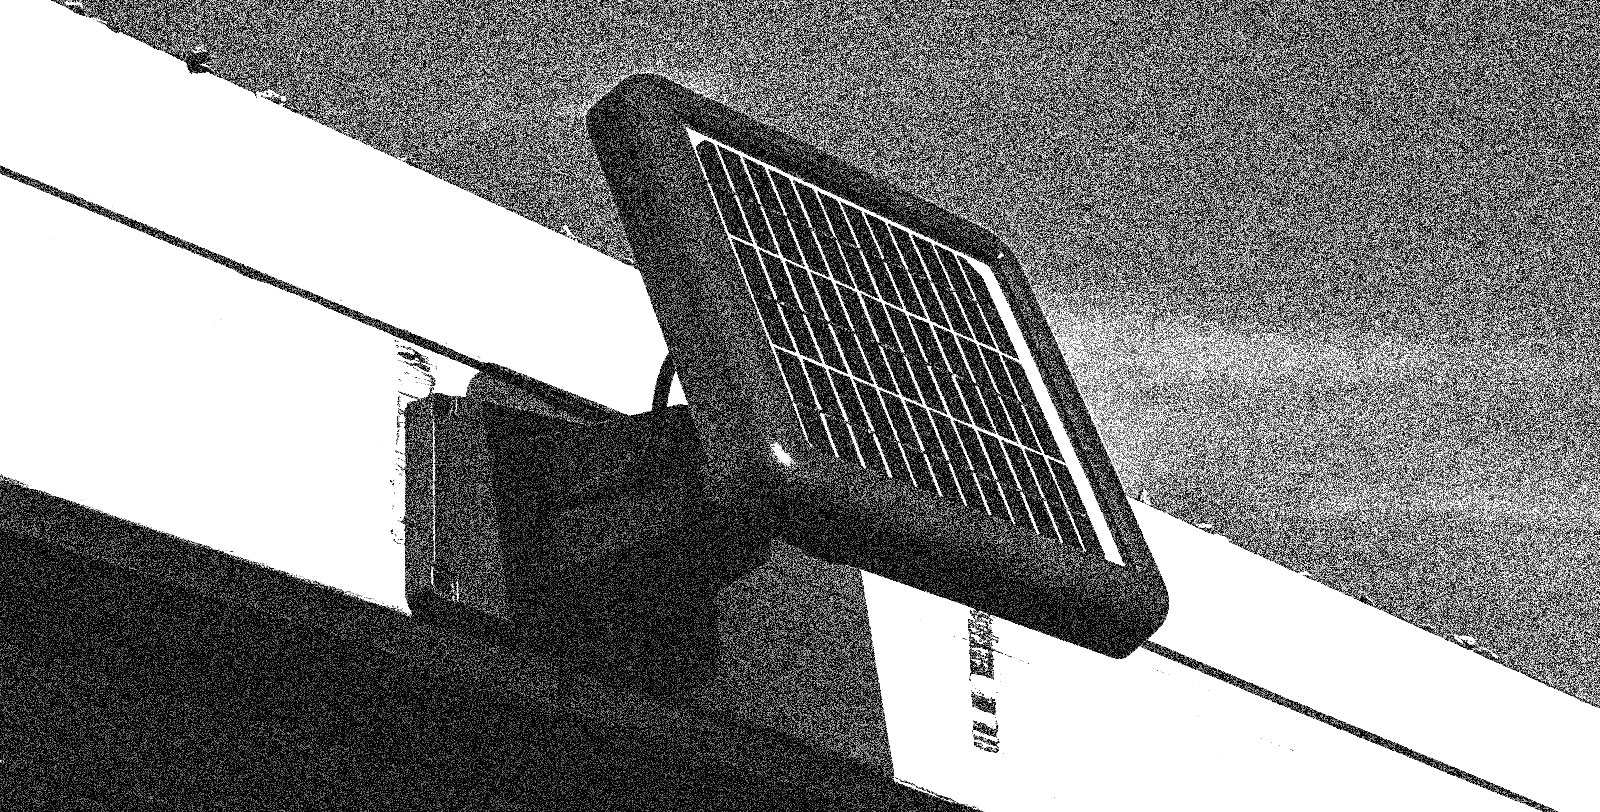 A grainy black-and-white image of a solar panel on the eaves of a house.